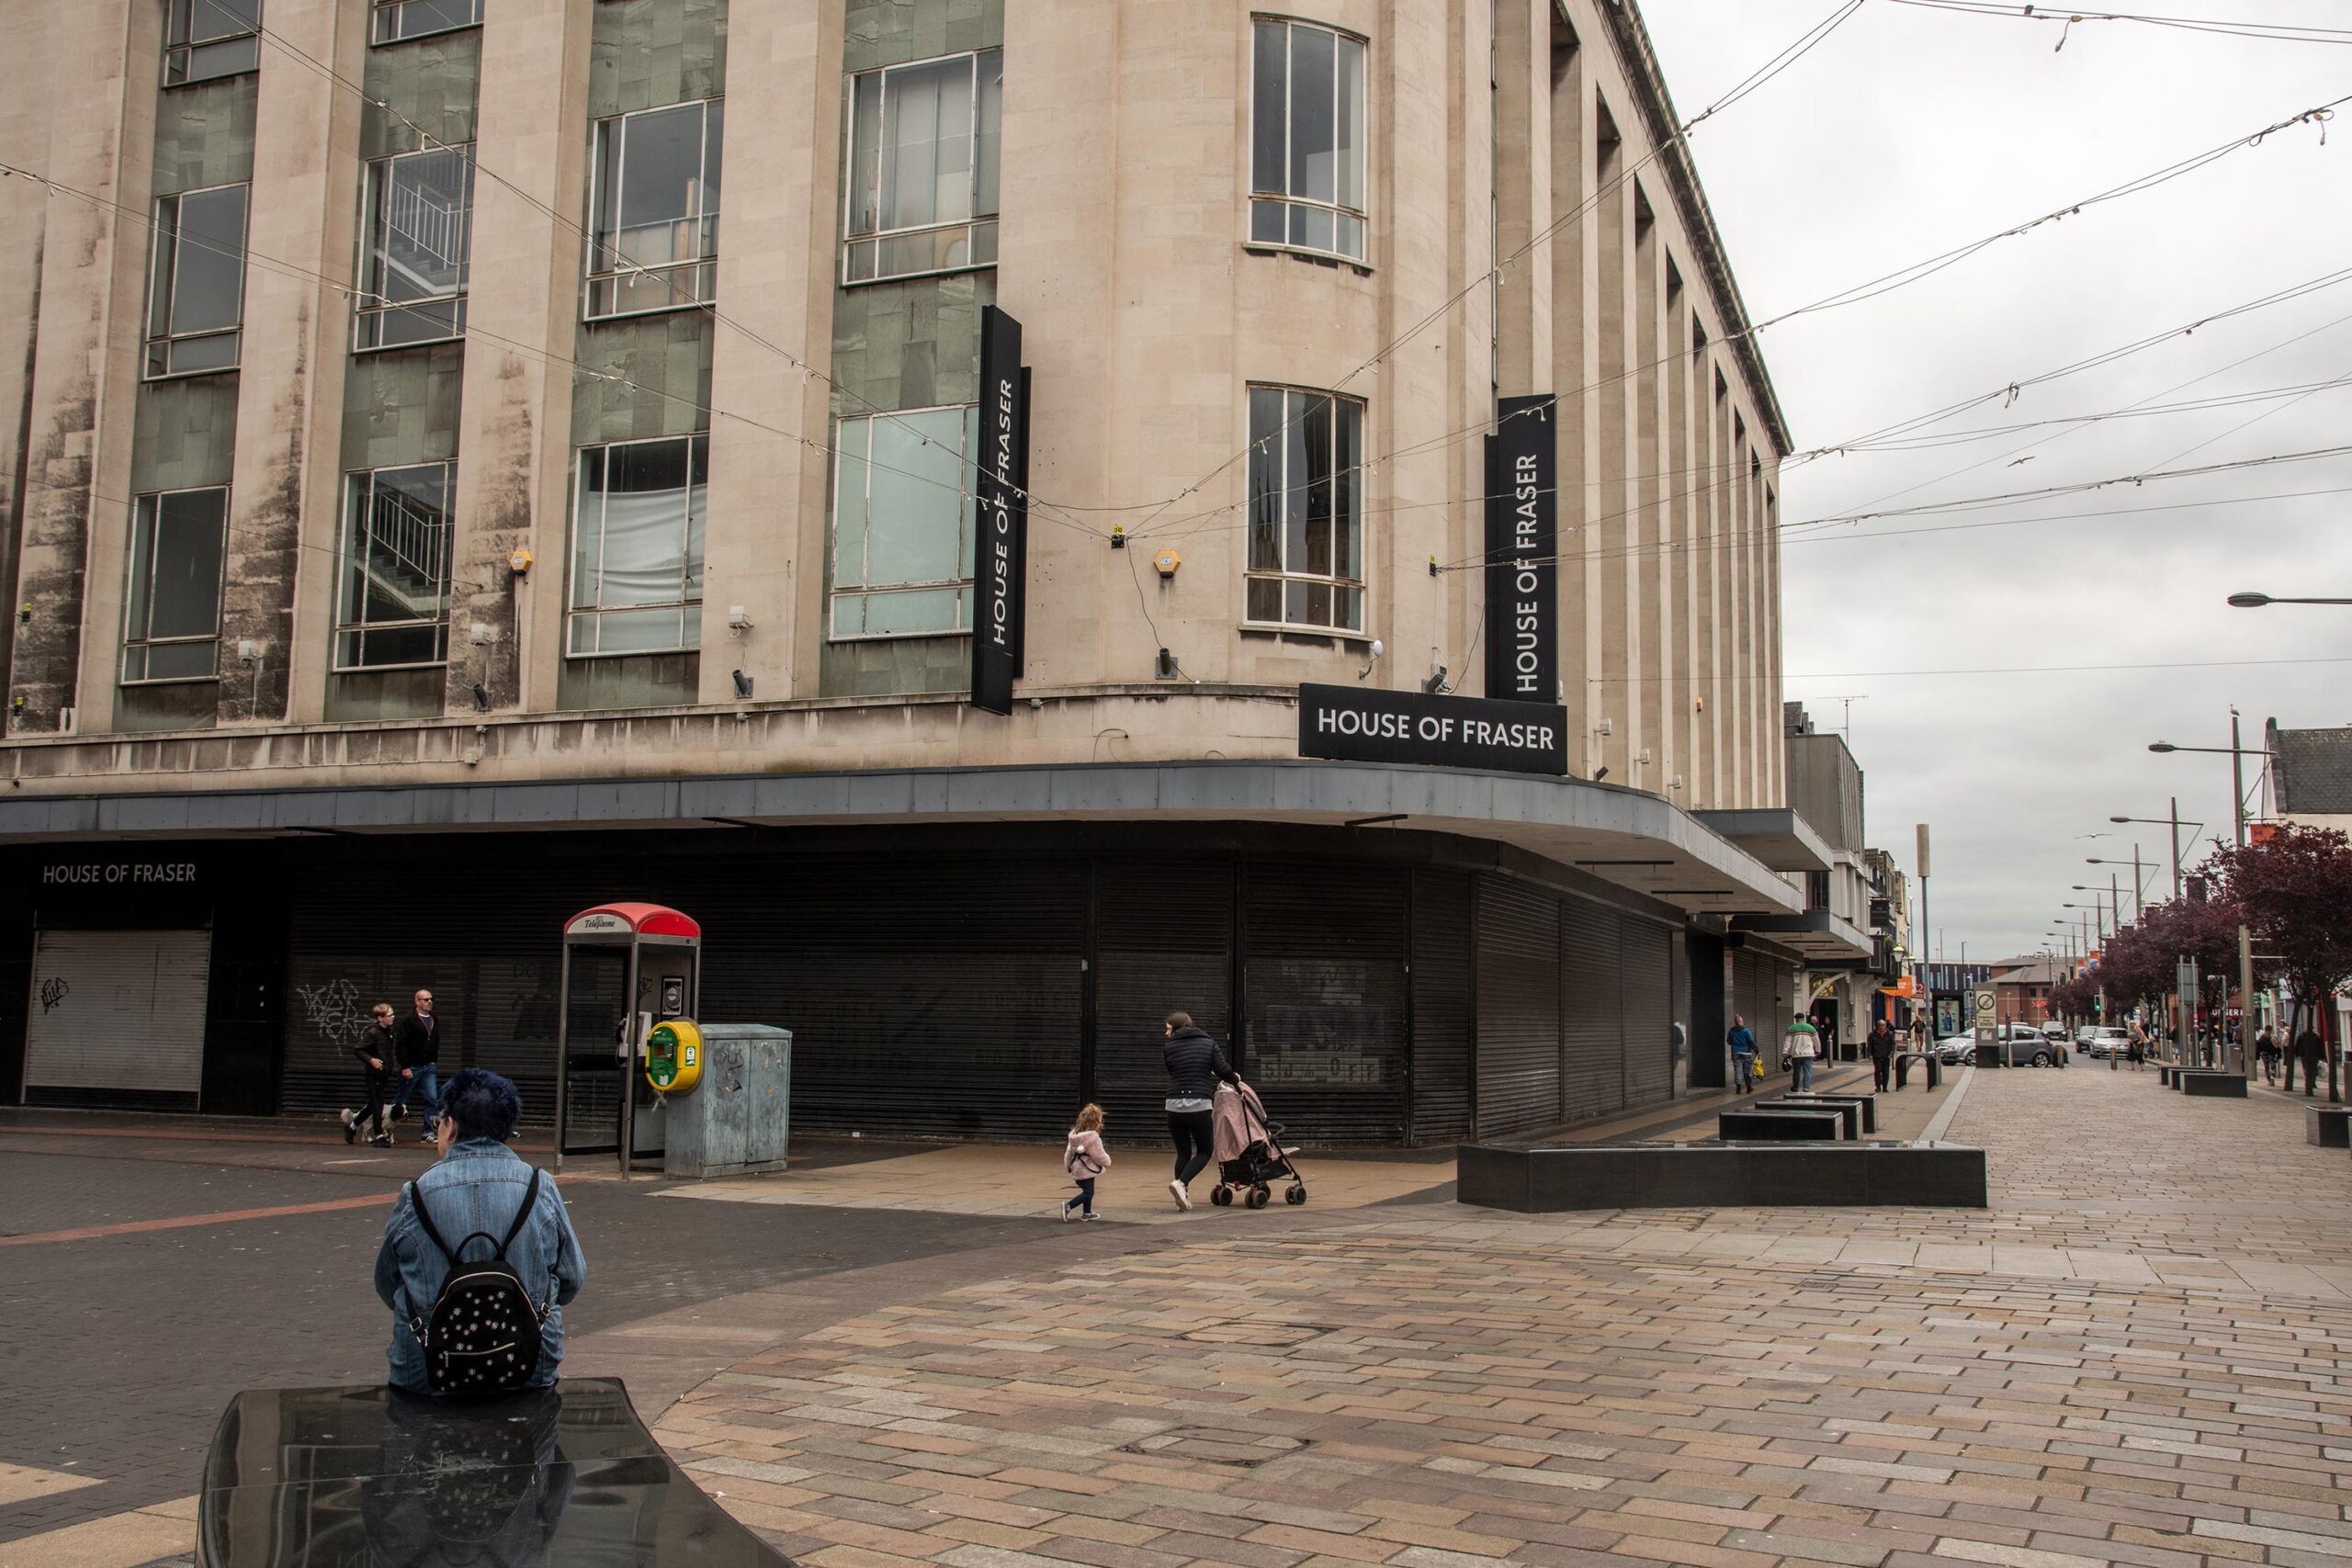 The closed-down House of Fraser department store in the center of the UK town of Middlesbrough, see...